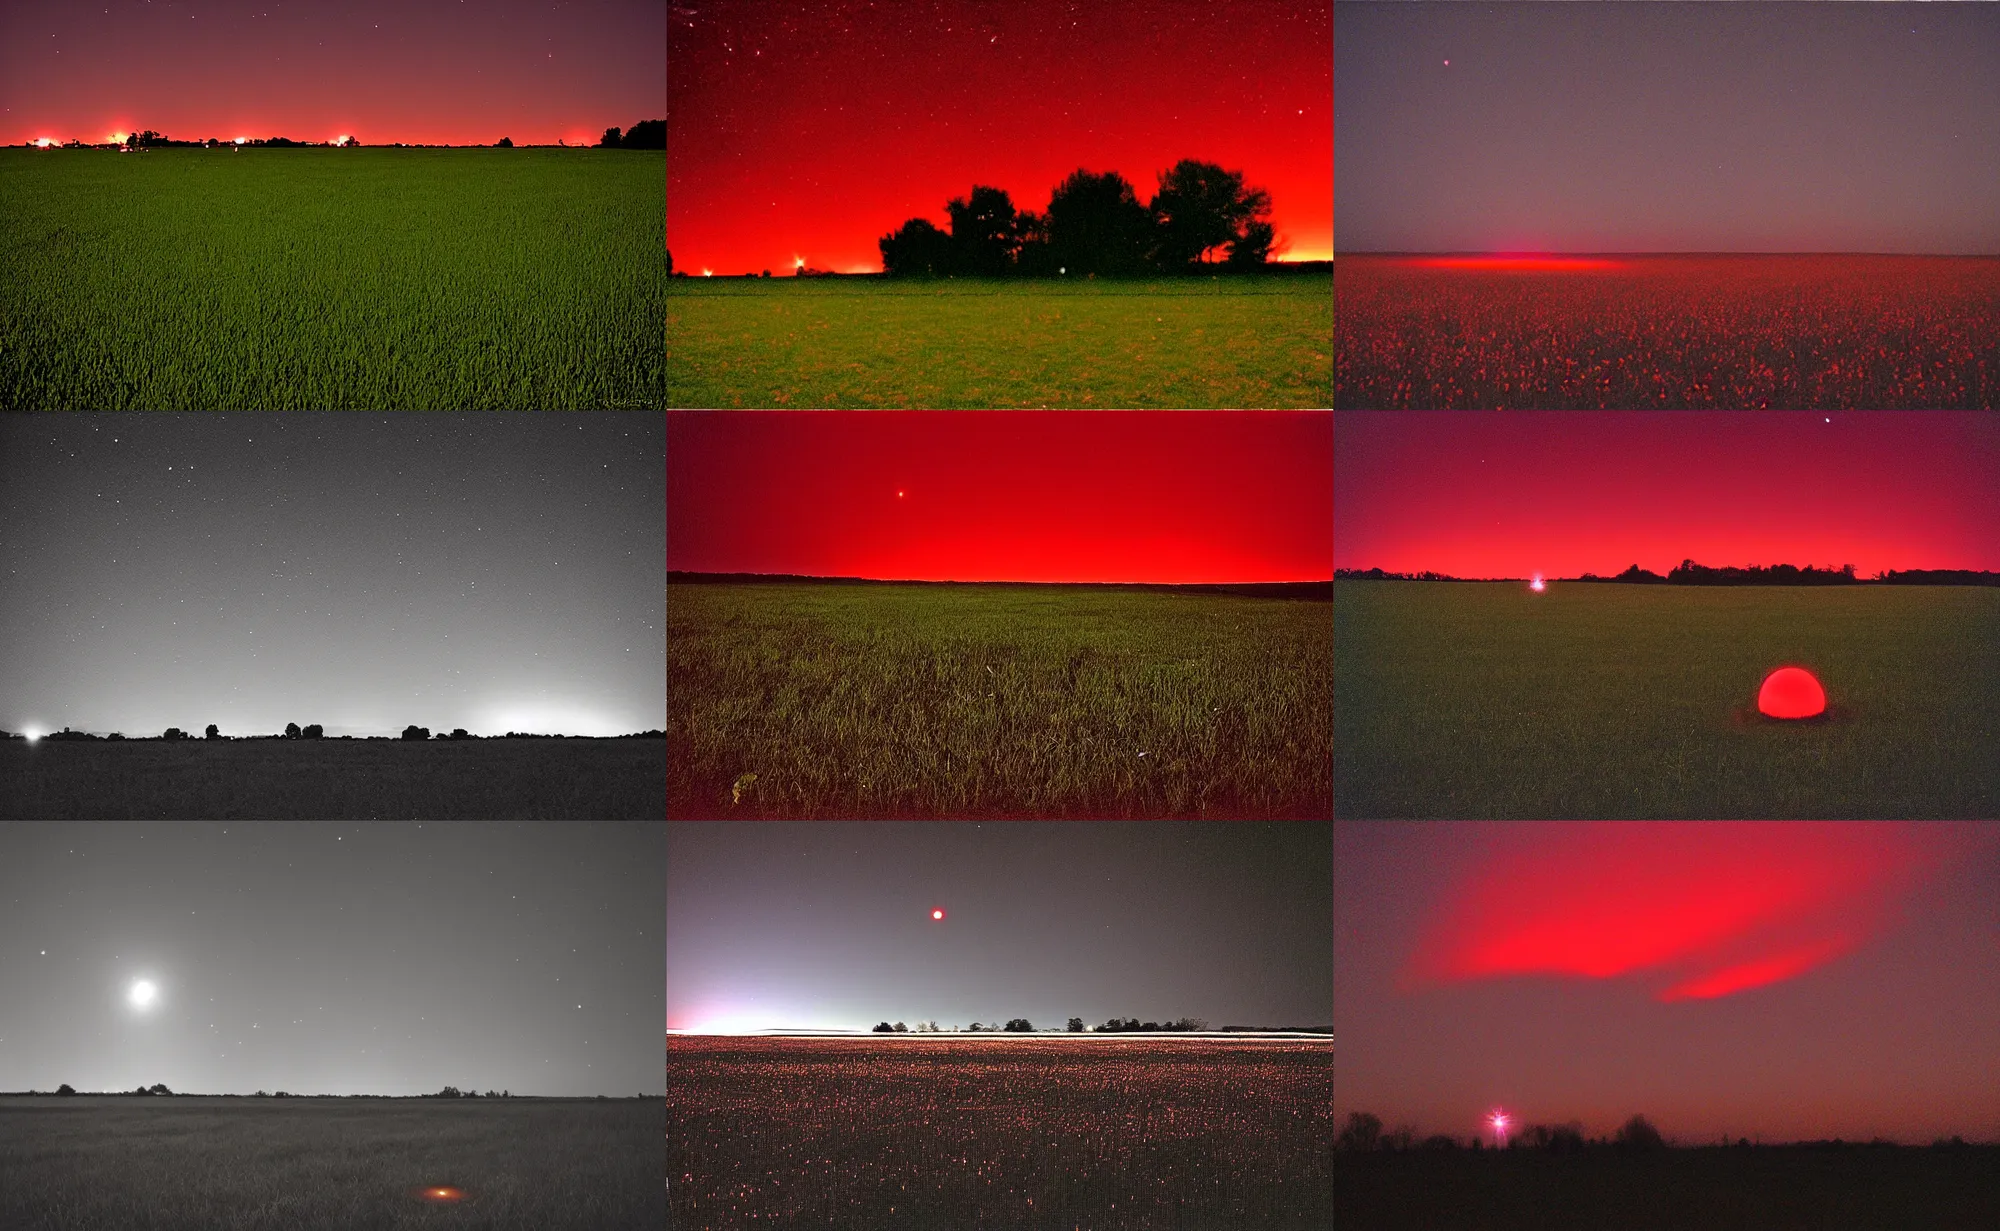 Prompt: a giant red glowing spot is visible in the sky, night, field, 2003 photo taken from phone